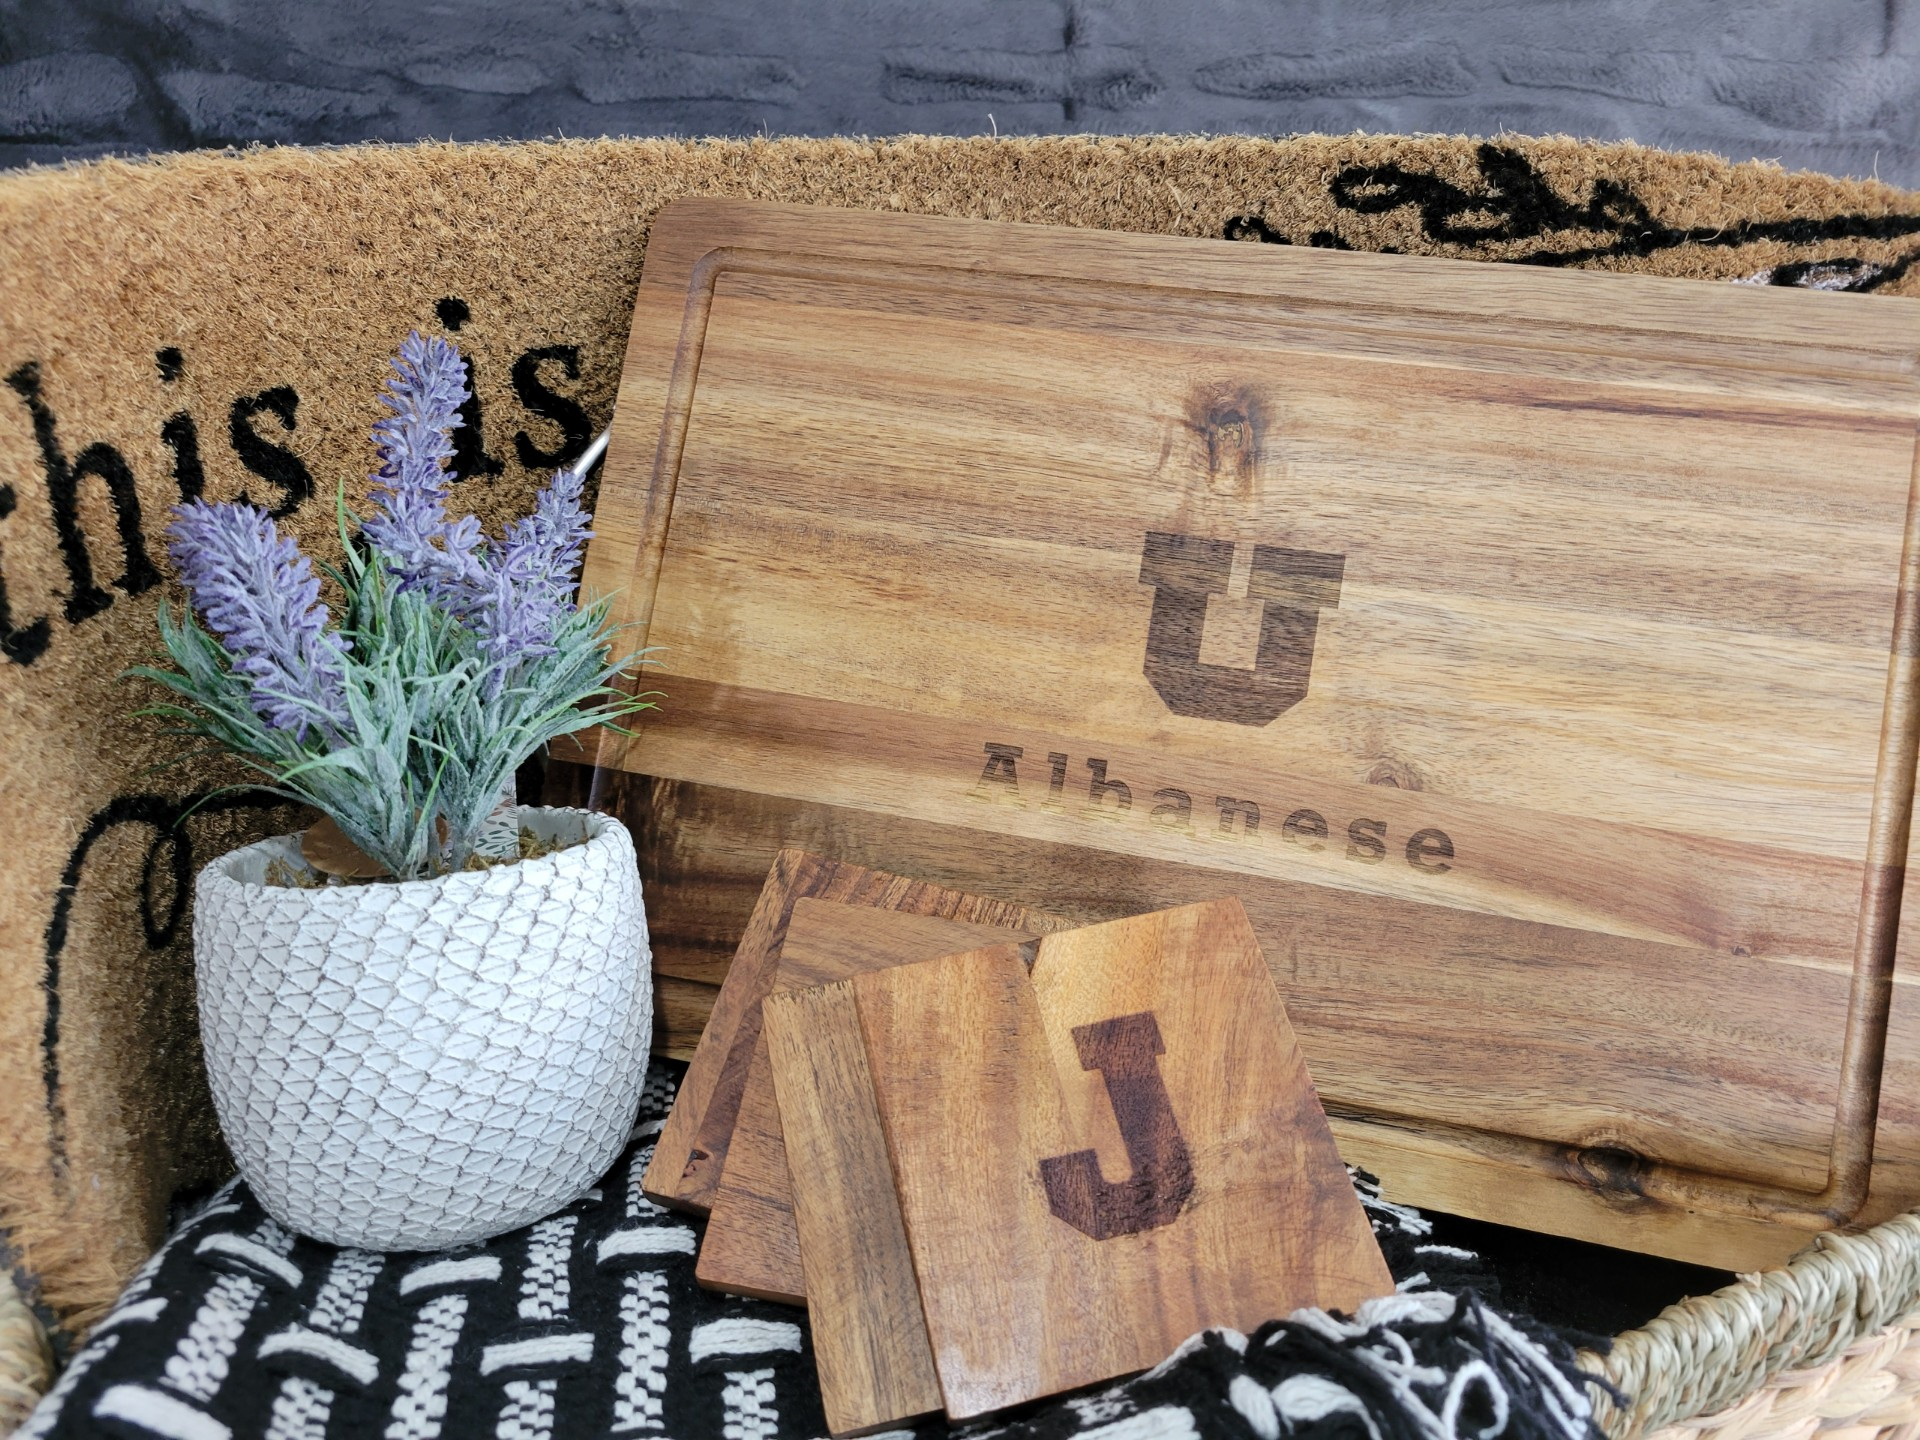 Personalized/Branded Cutting Board.